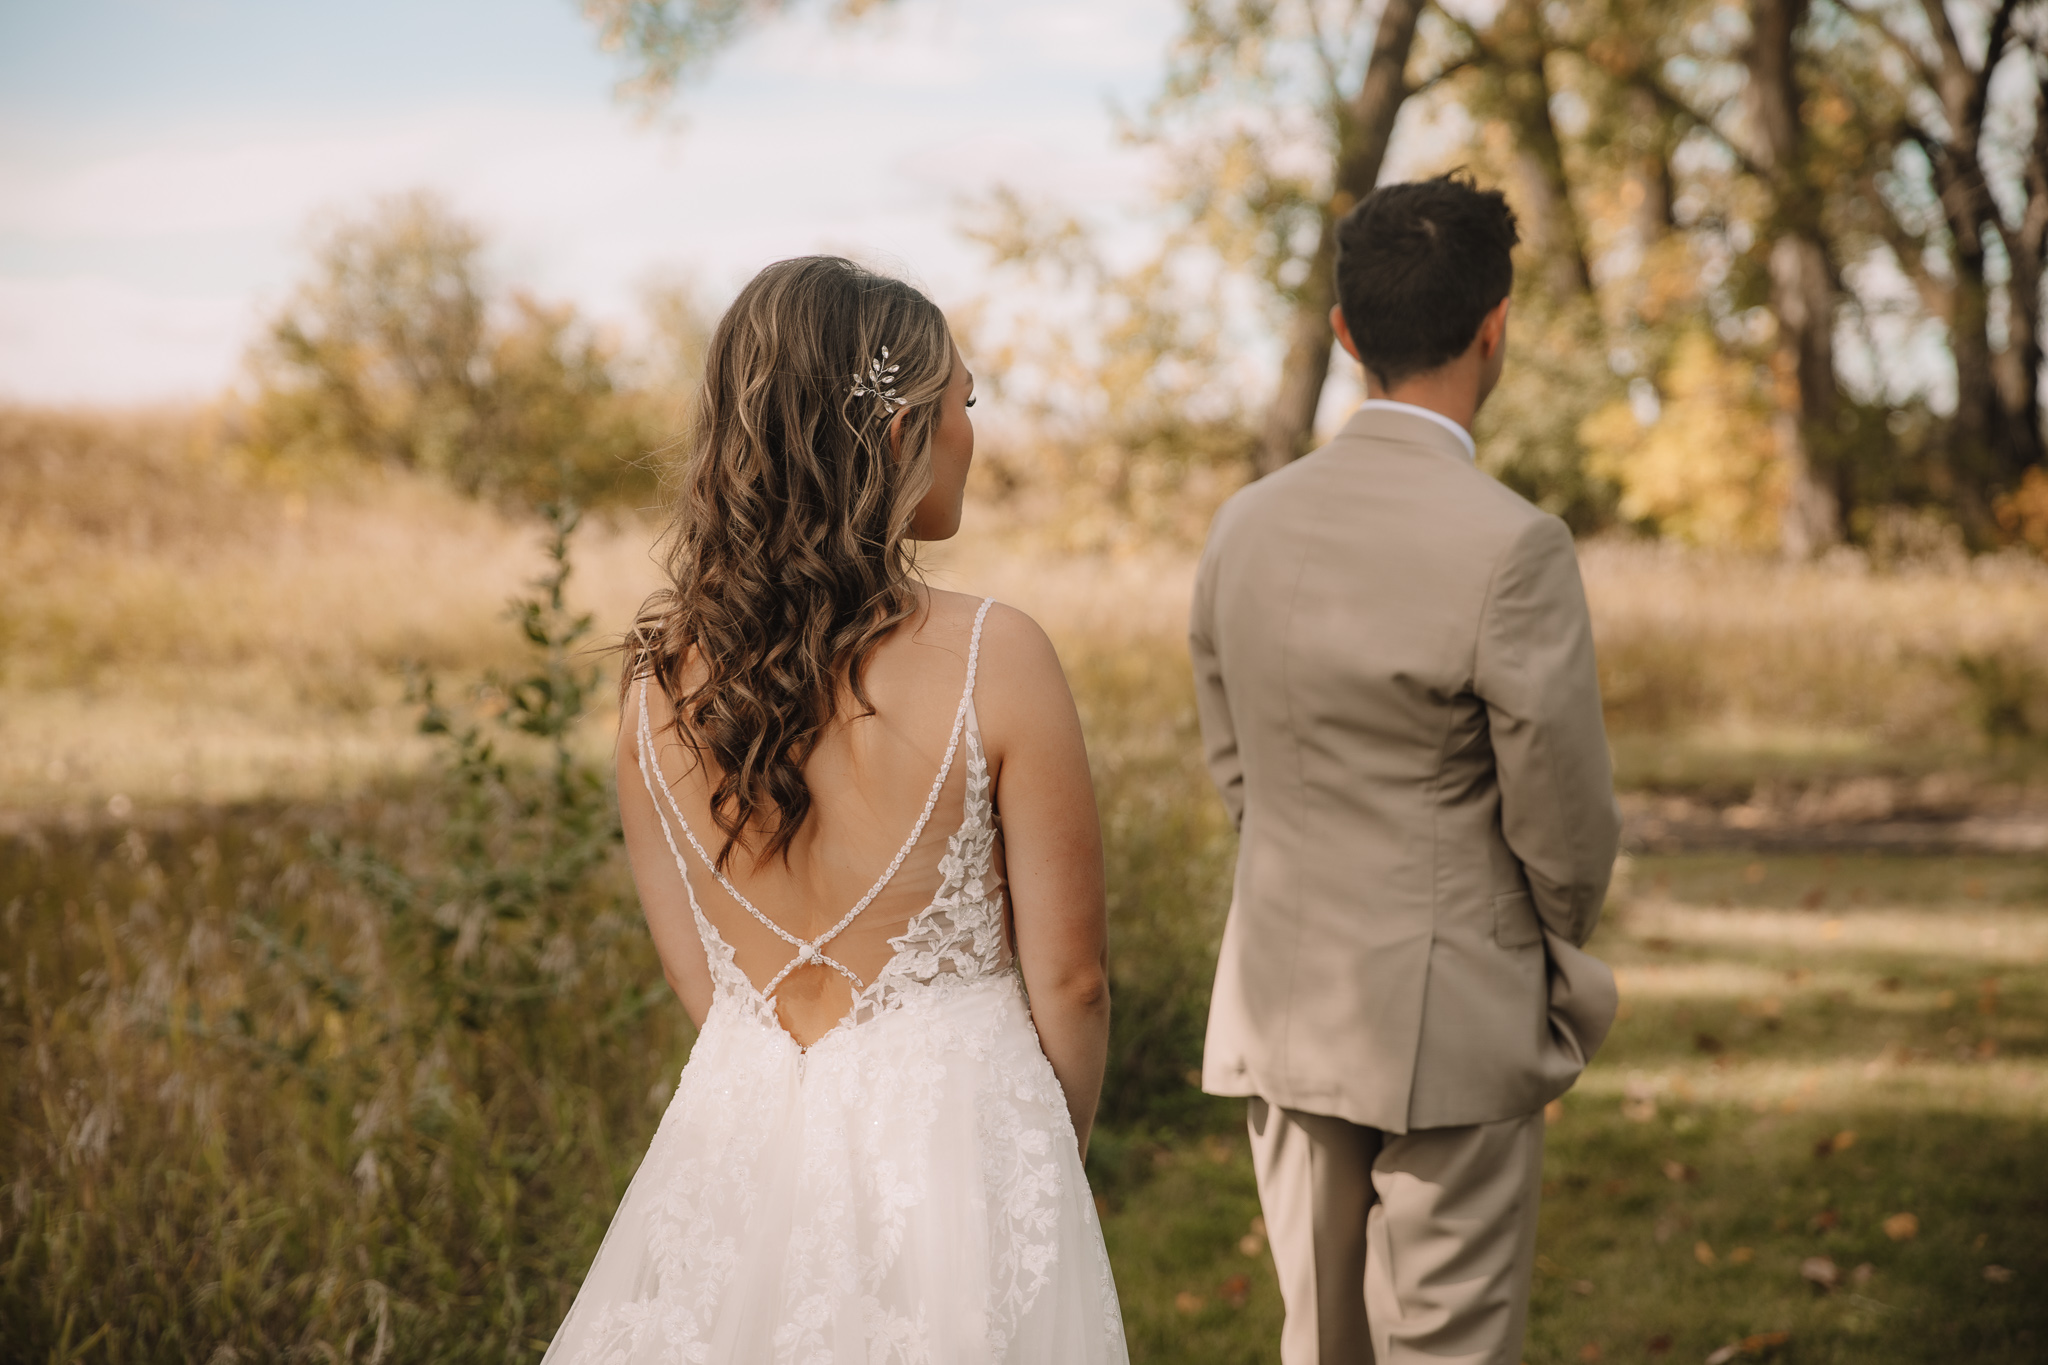 Bride with a beautiful open back dress, standing behind her groom as she gets ready to show him what she looks like for the first time